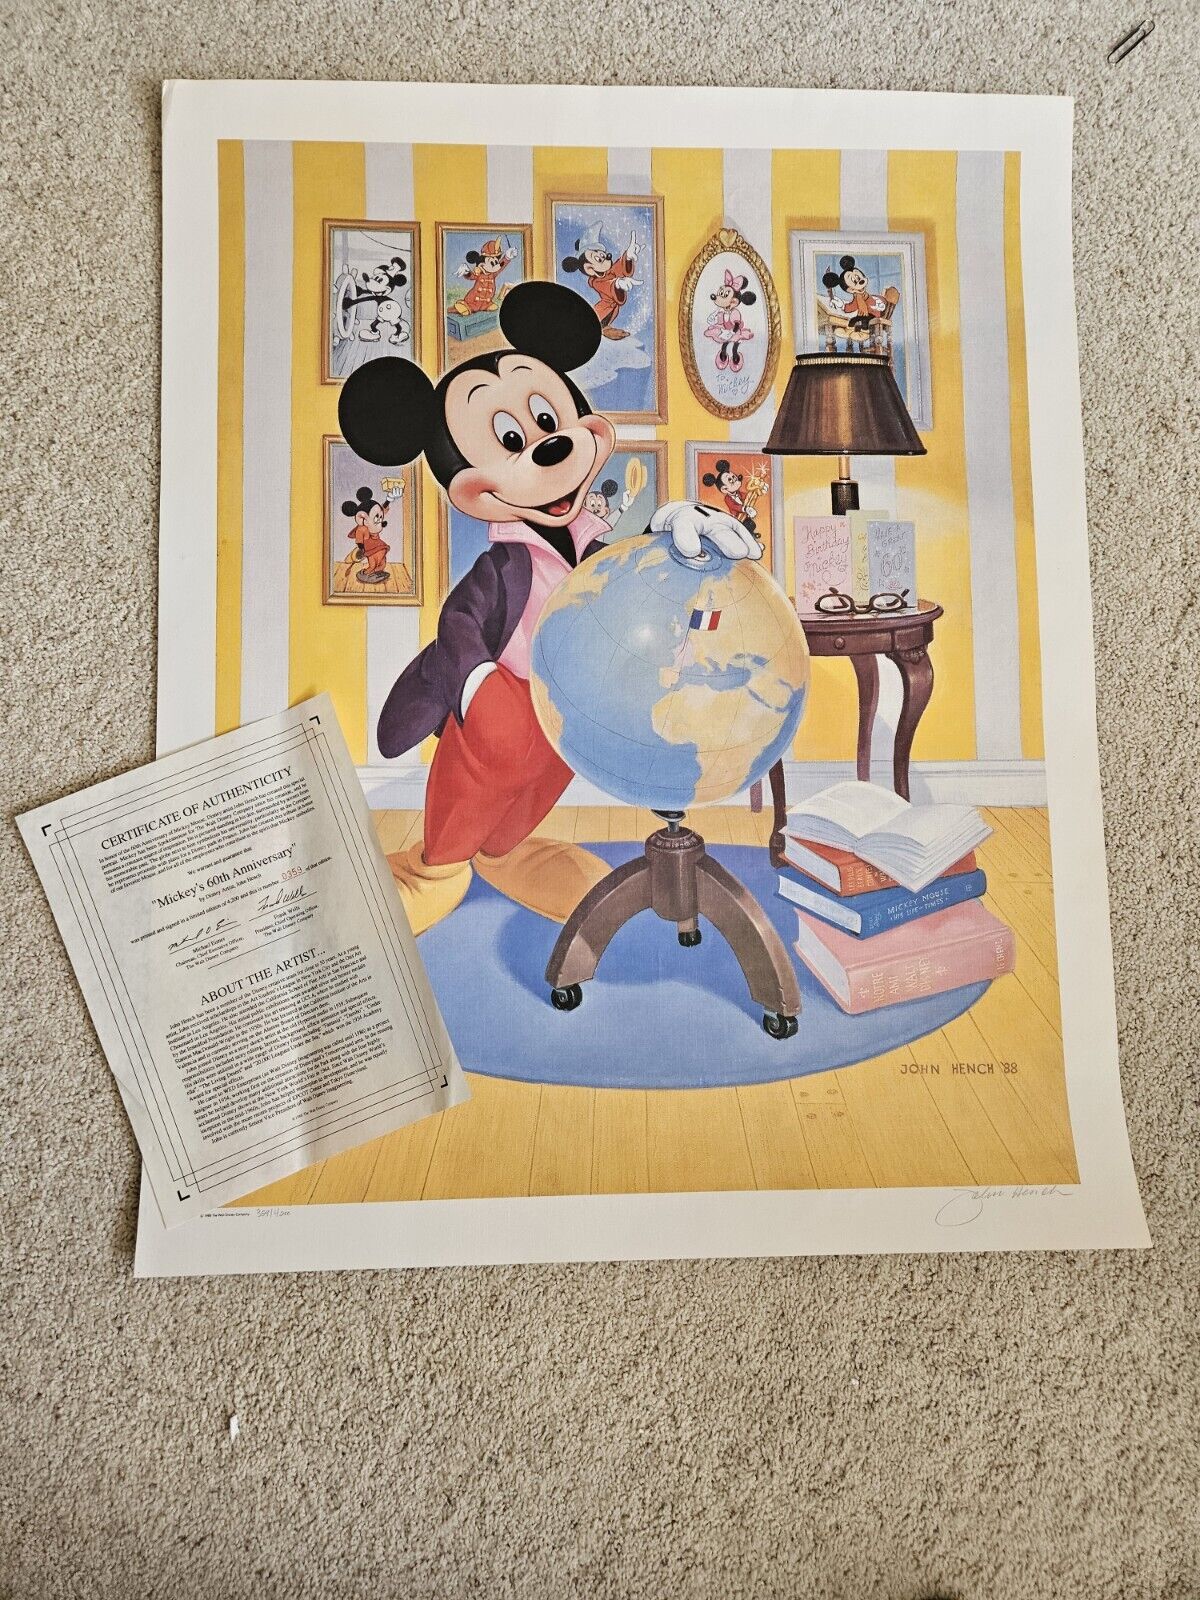 John Hench Signed Mickey Mouse 25x31 Lithograph 60th Anniversary Poster LE # 359